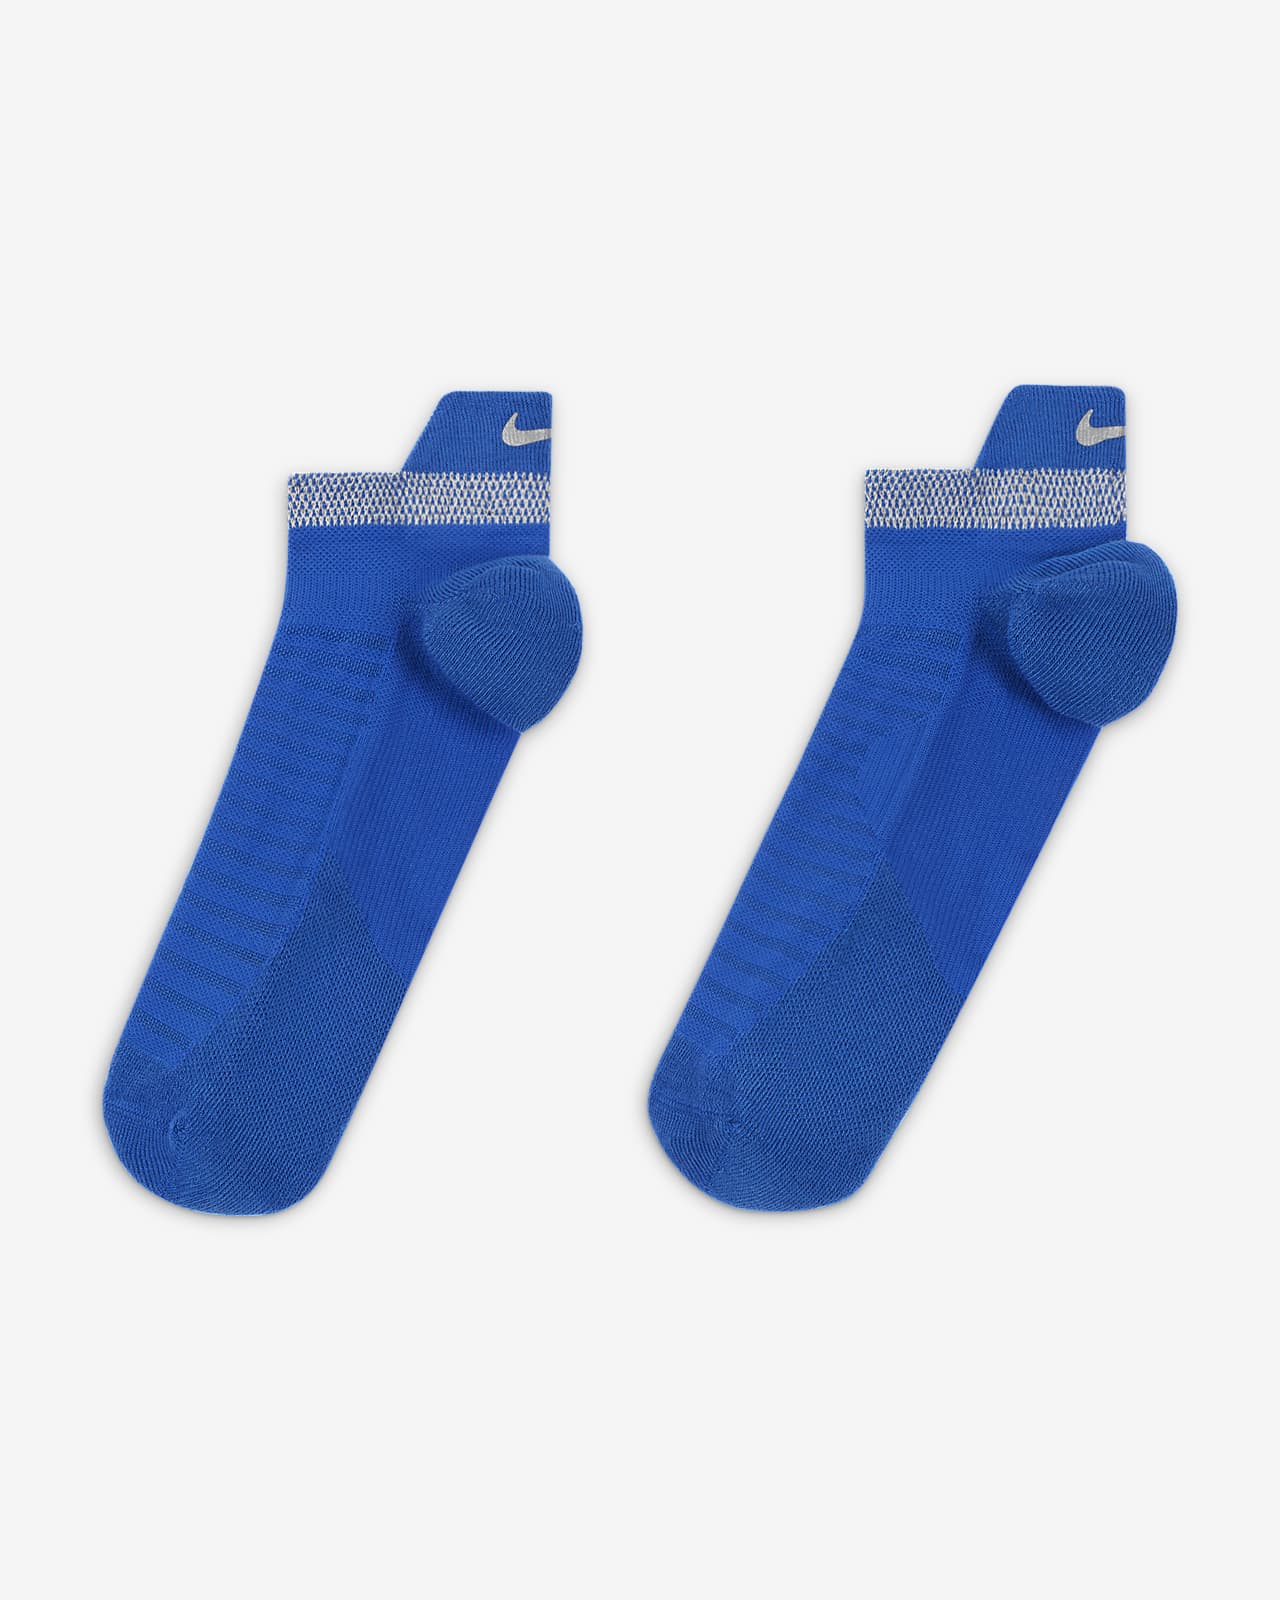 Chaussettes Nike Spark Lightweight - Nike - Homme - Entretien physique